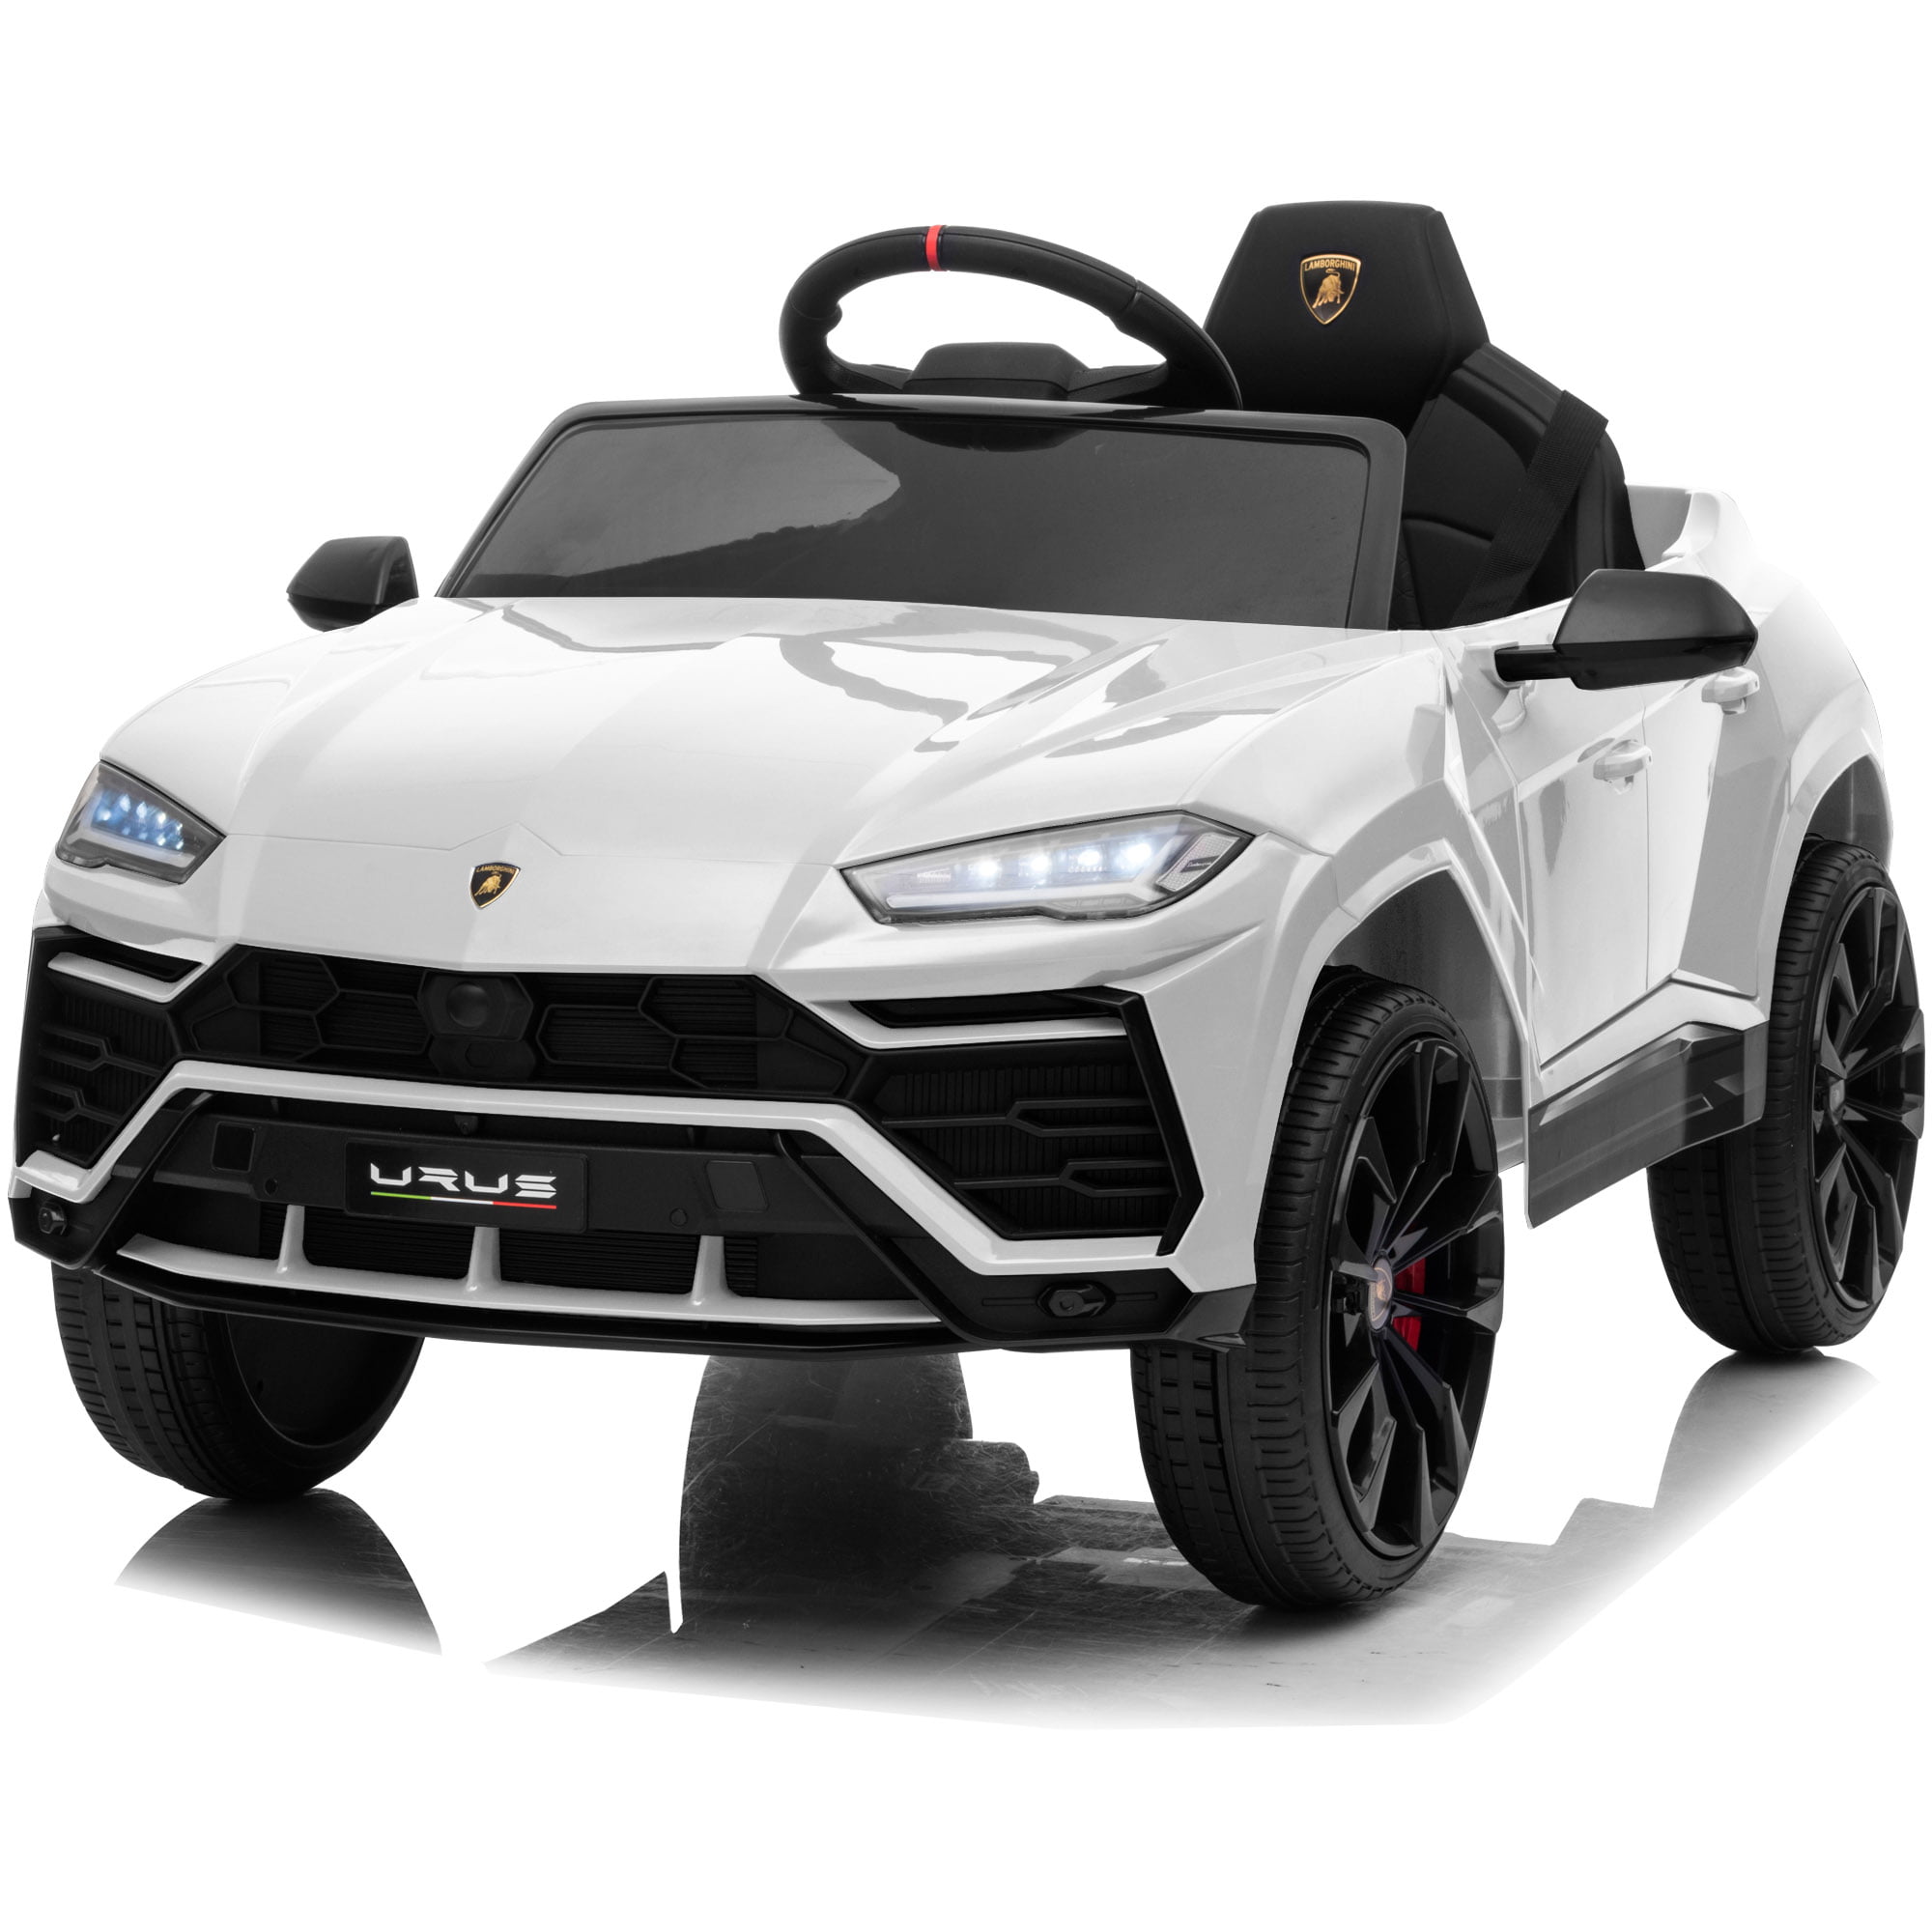 WHITE ELECTRIC RIDE ON CAR WITH REMOTE CONTROL LAMBORGHINI STYLE HYDRAULIC DOORS 